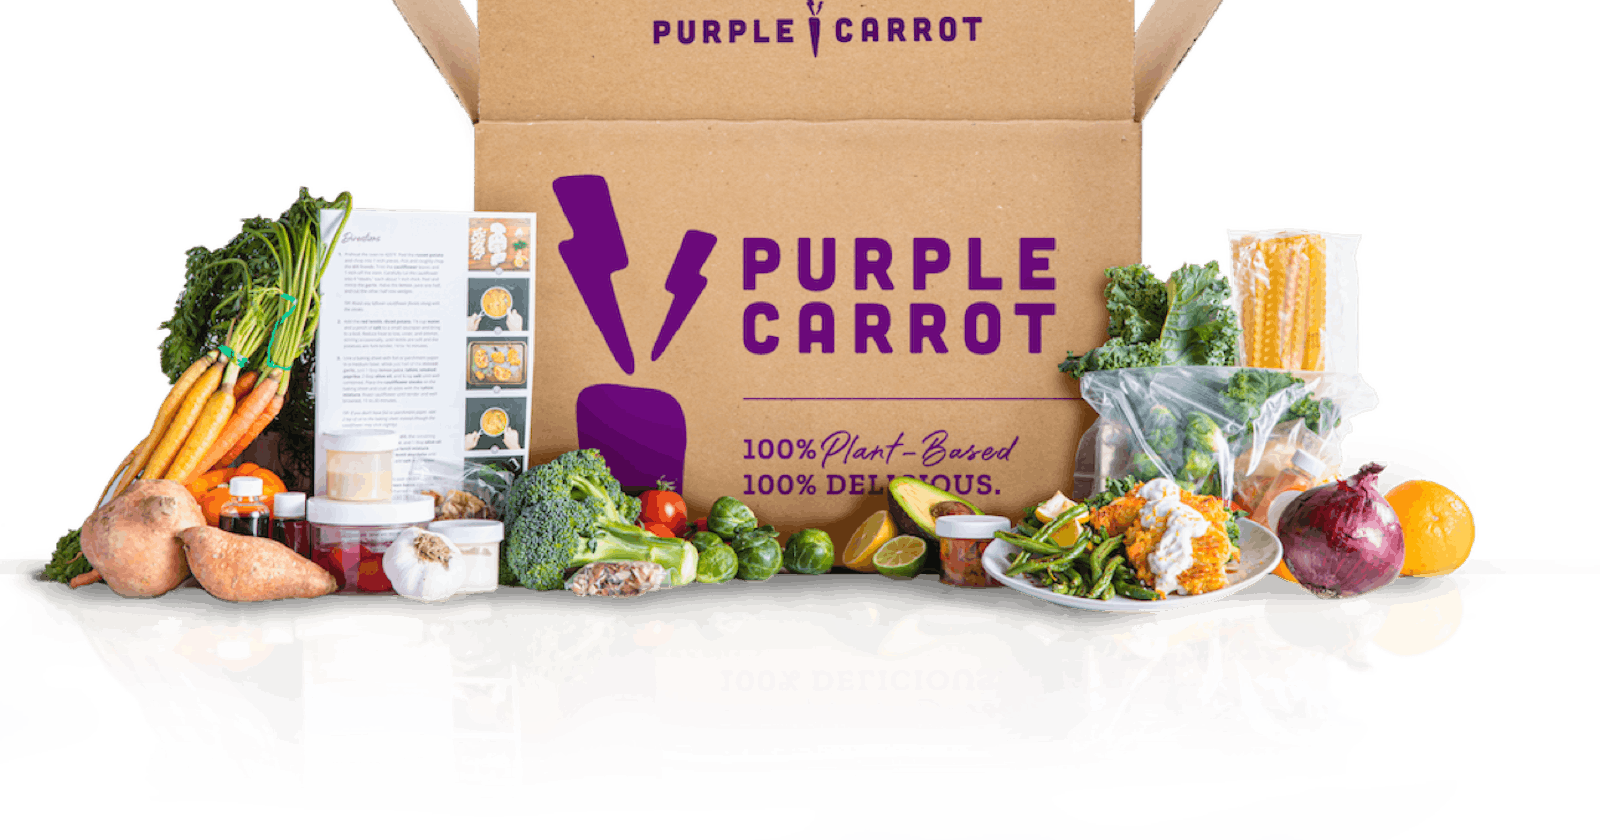 Purple Carrot Reviews - What to Know Before Buy!